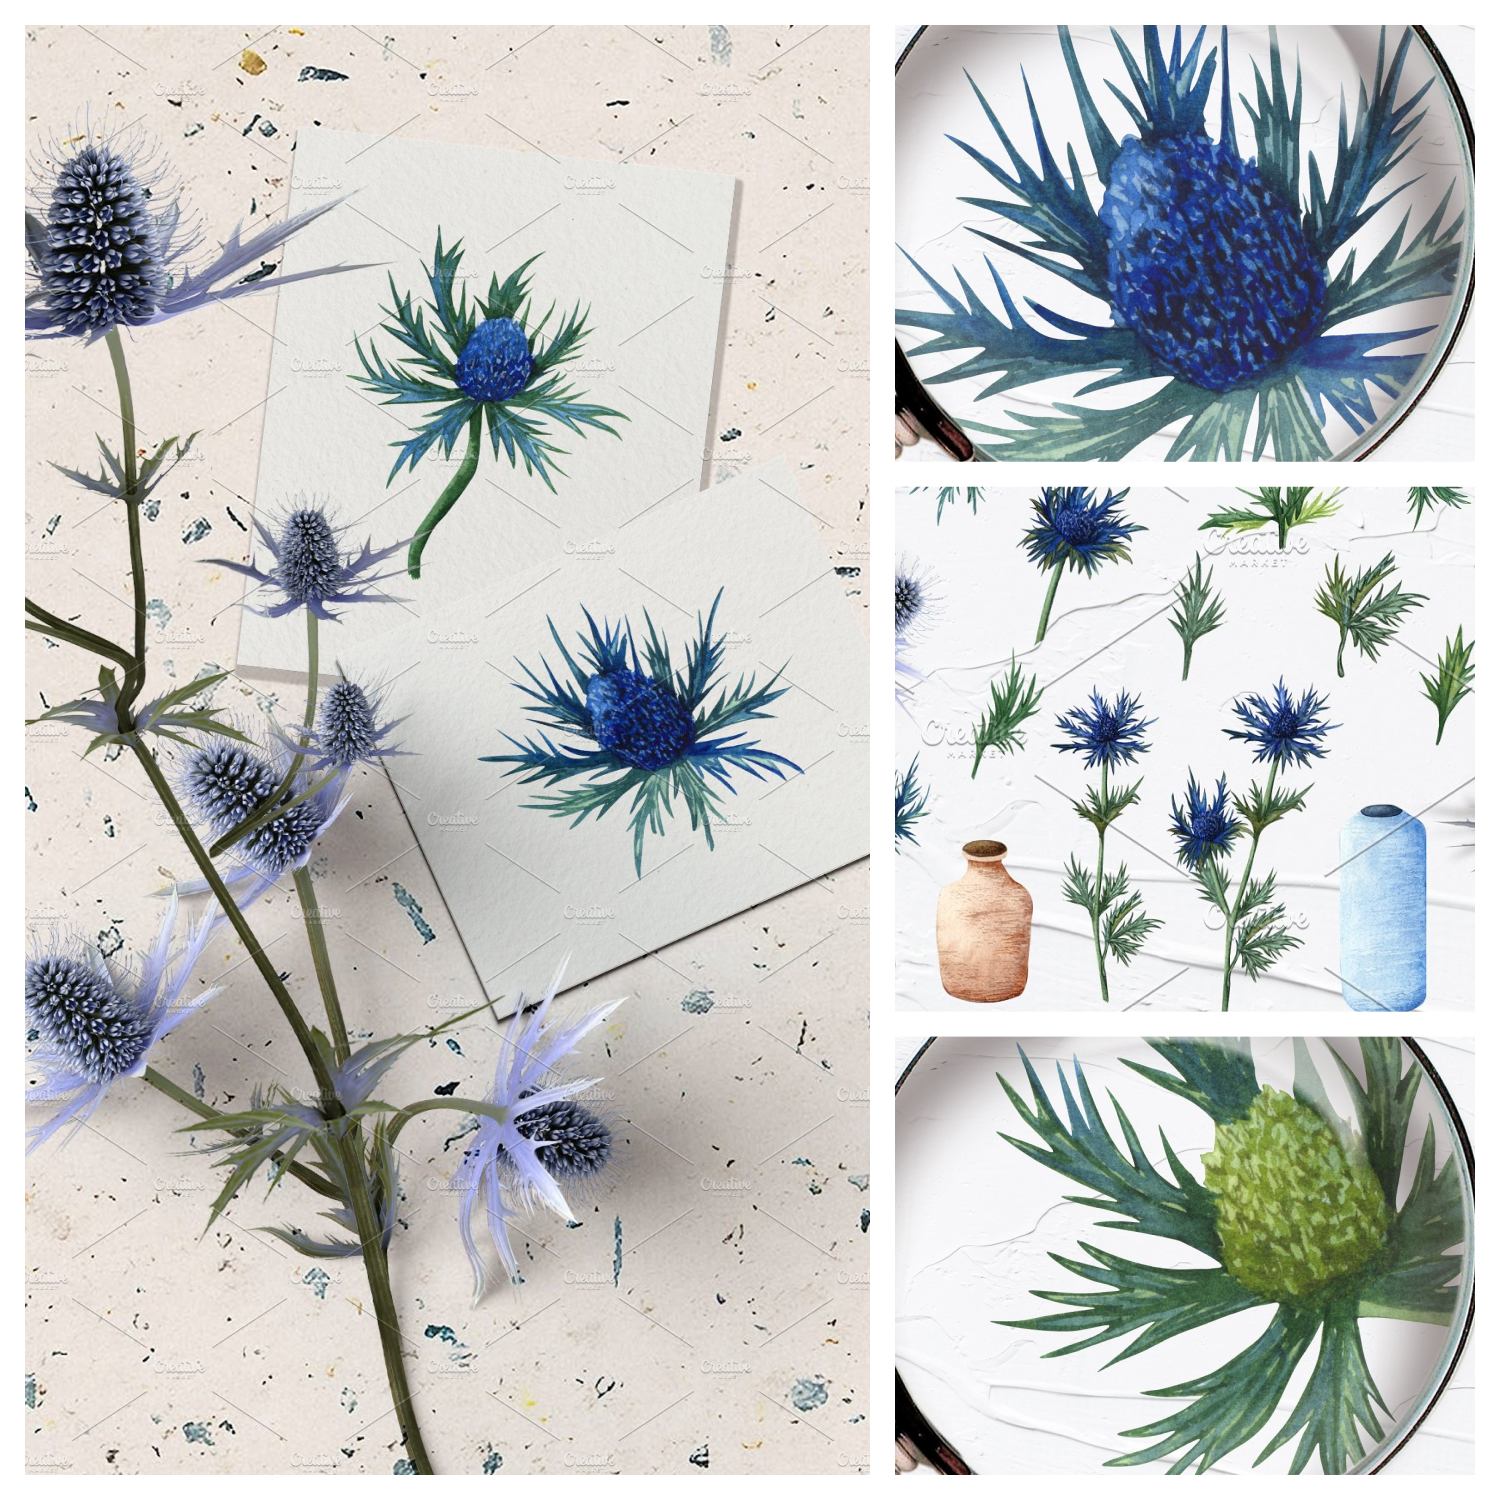 Images of thistles for use on prints are shown.